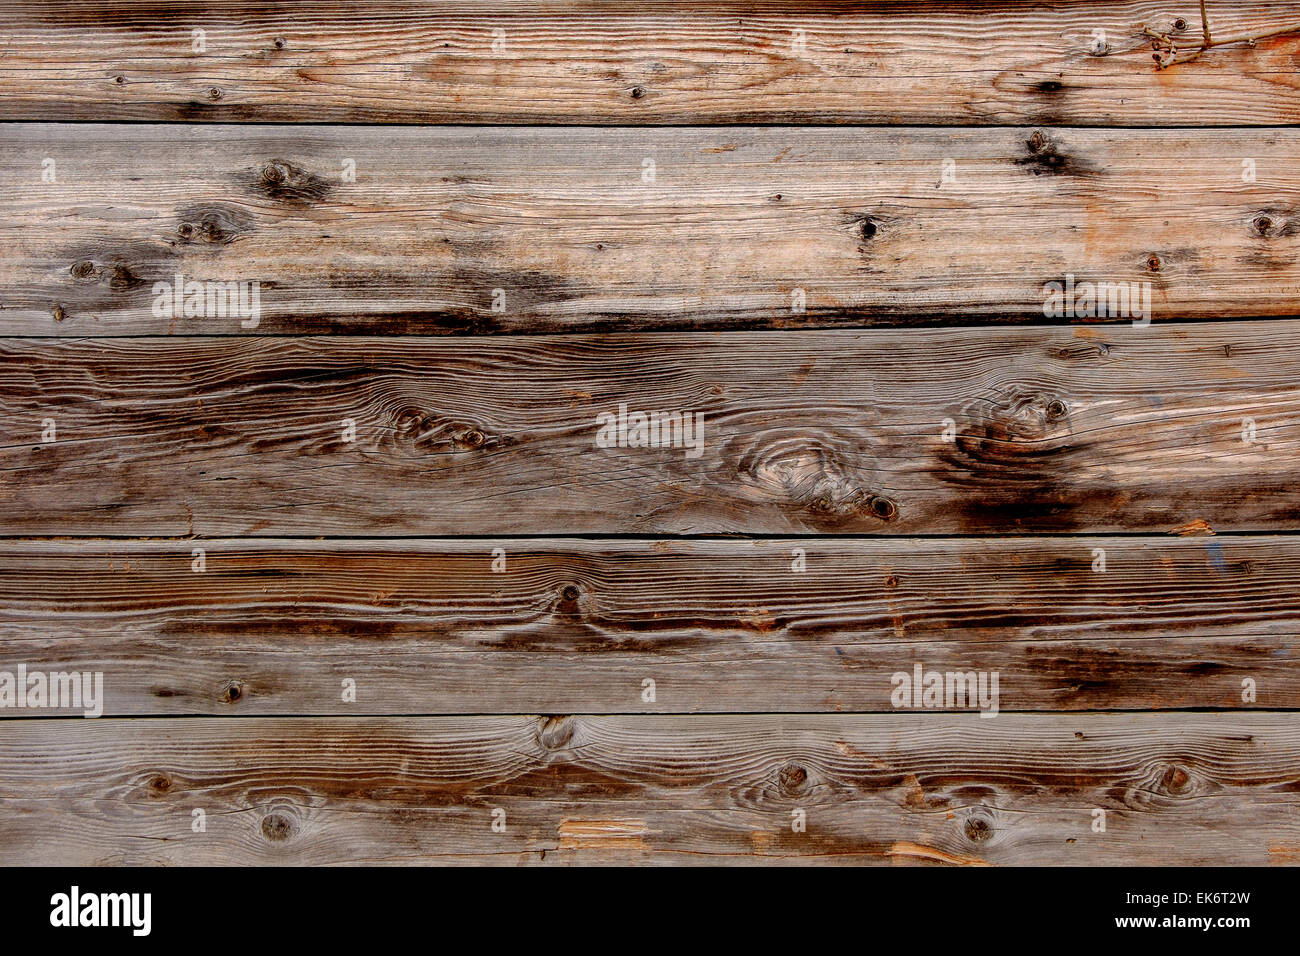 Old grunge wood panels. Brown wood plank wall texture background. Stock Photo